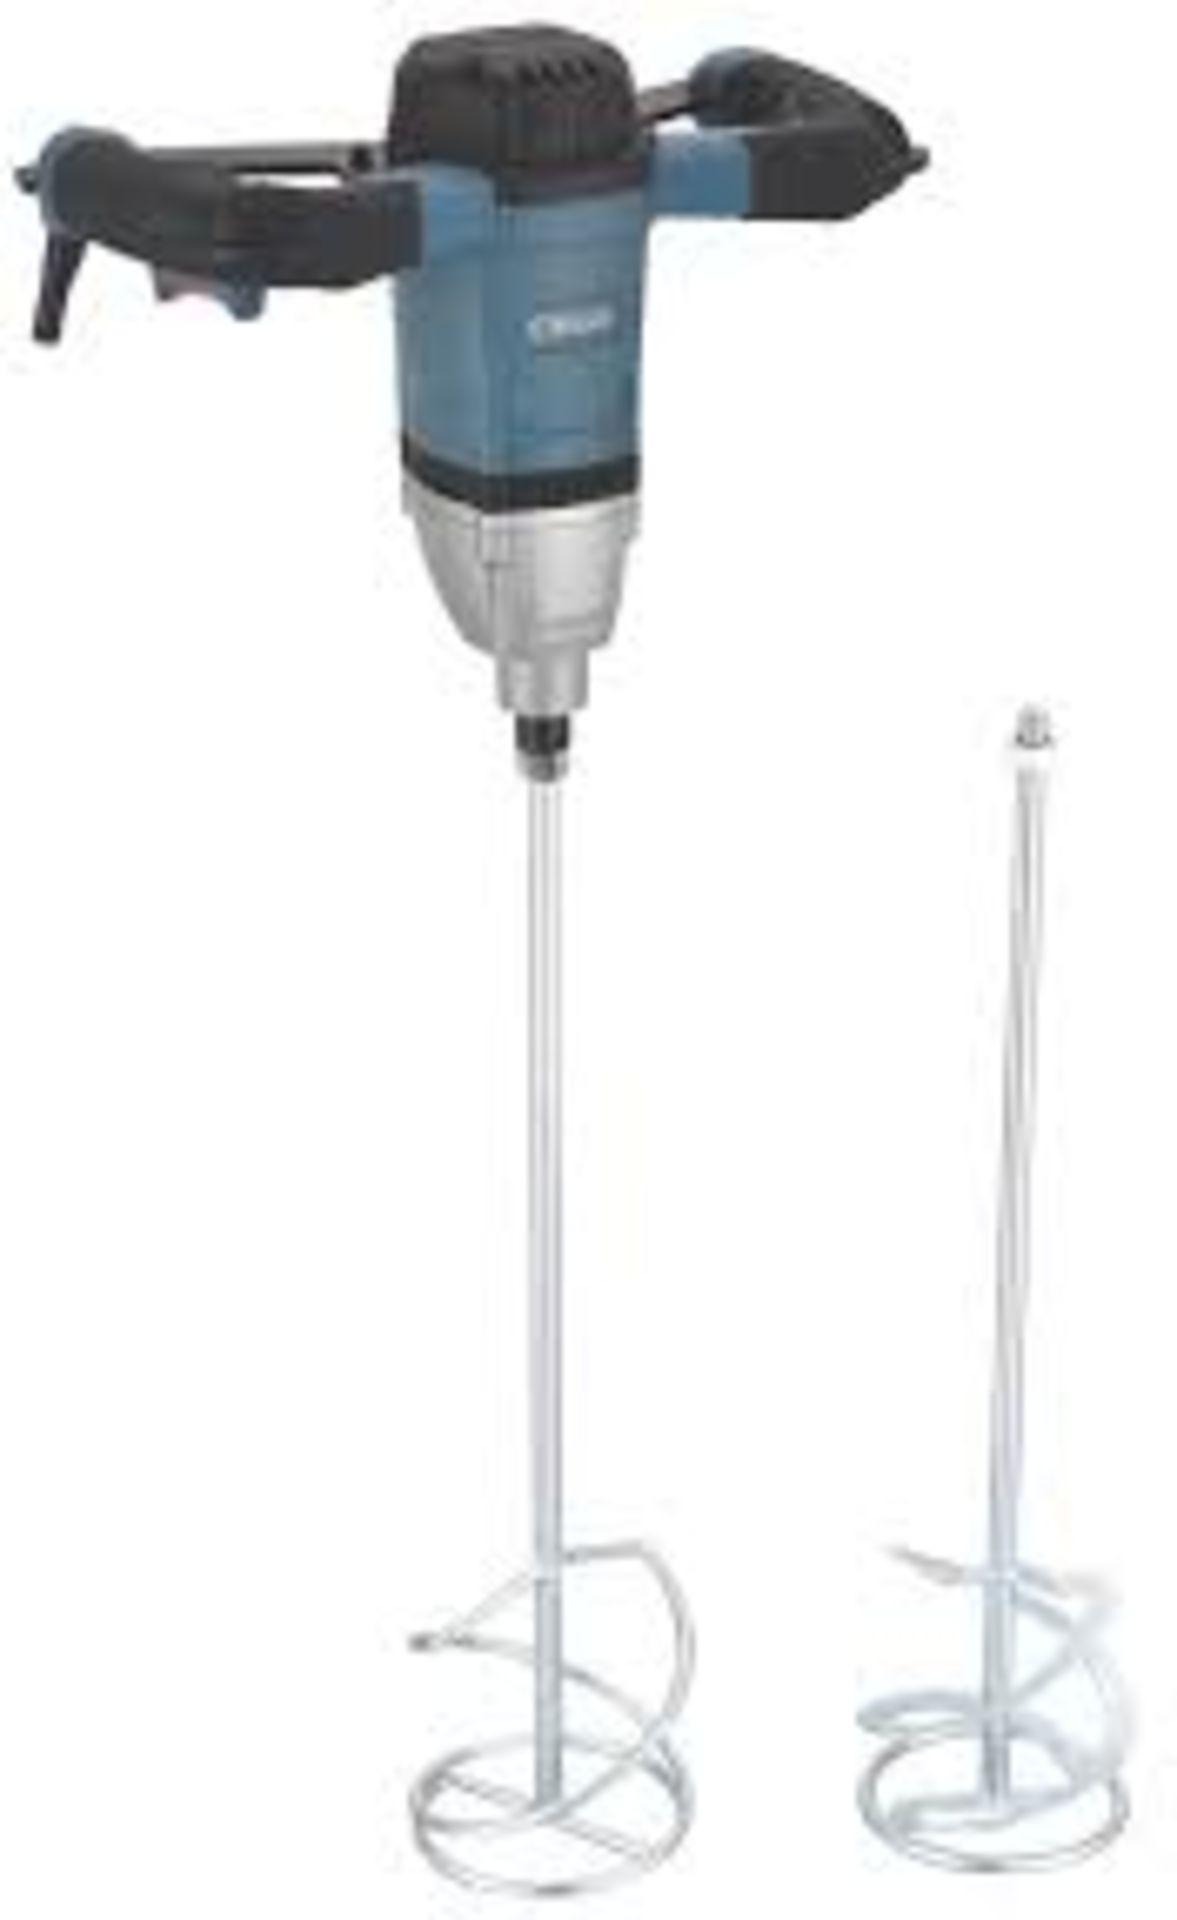 Erbauer EPM1600 1600W Electric Paddle Mixer 220-240V. - P4. Powerful and durable paddle mixer with